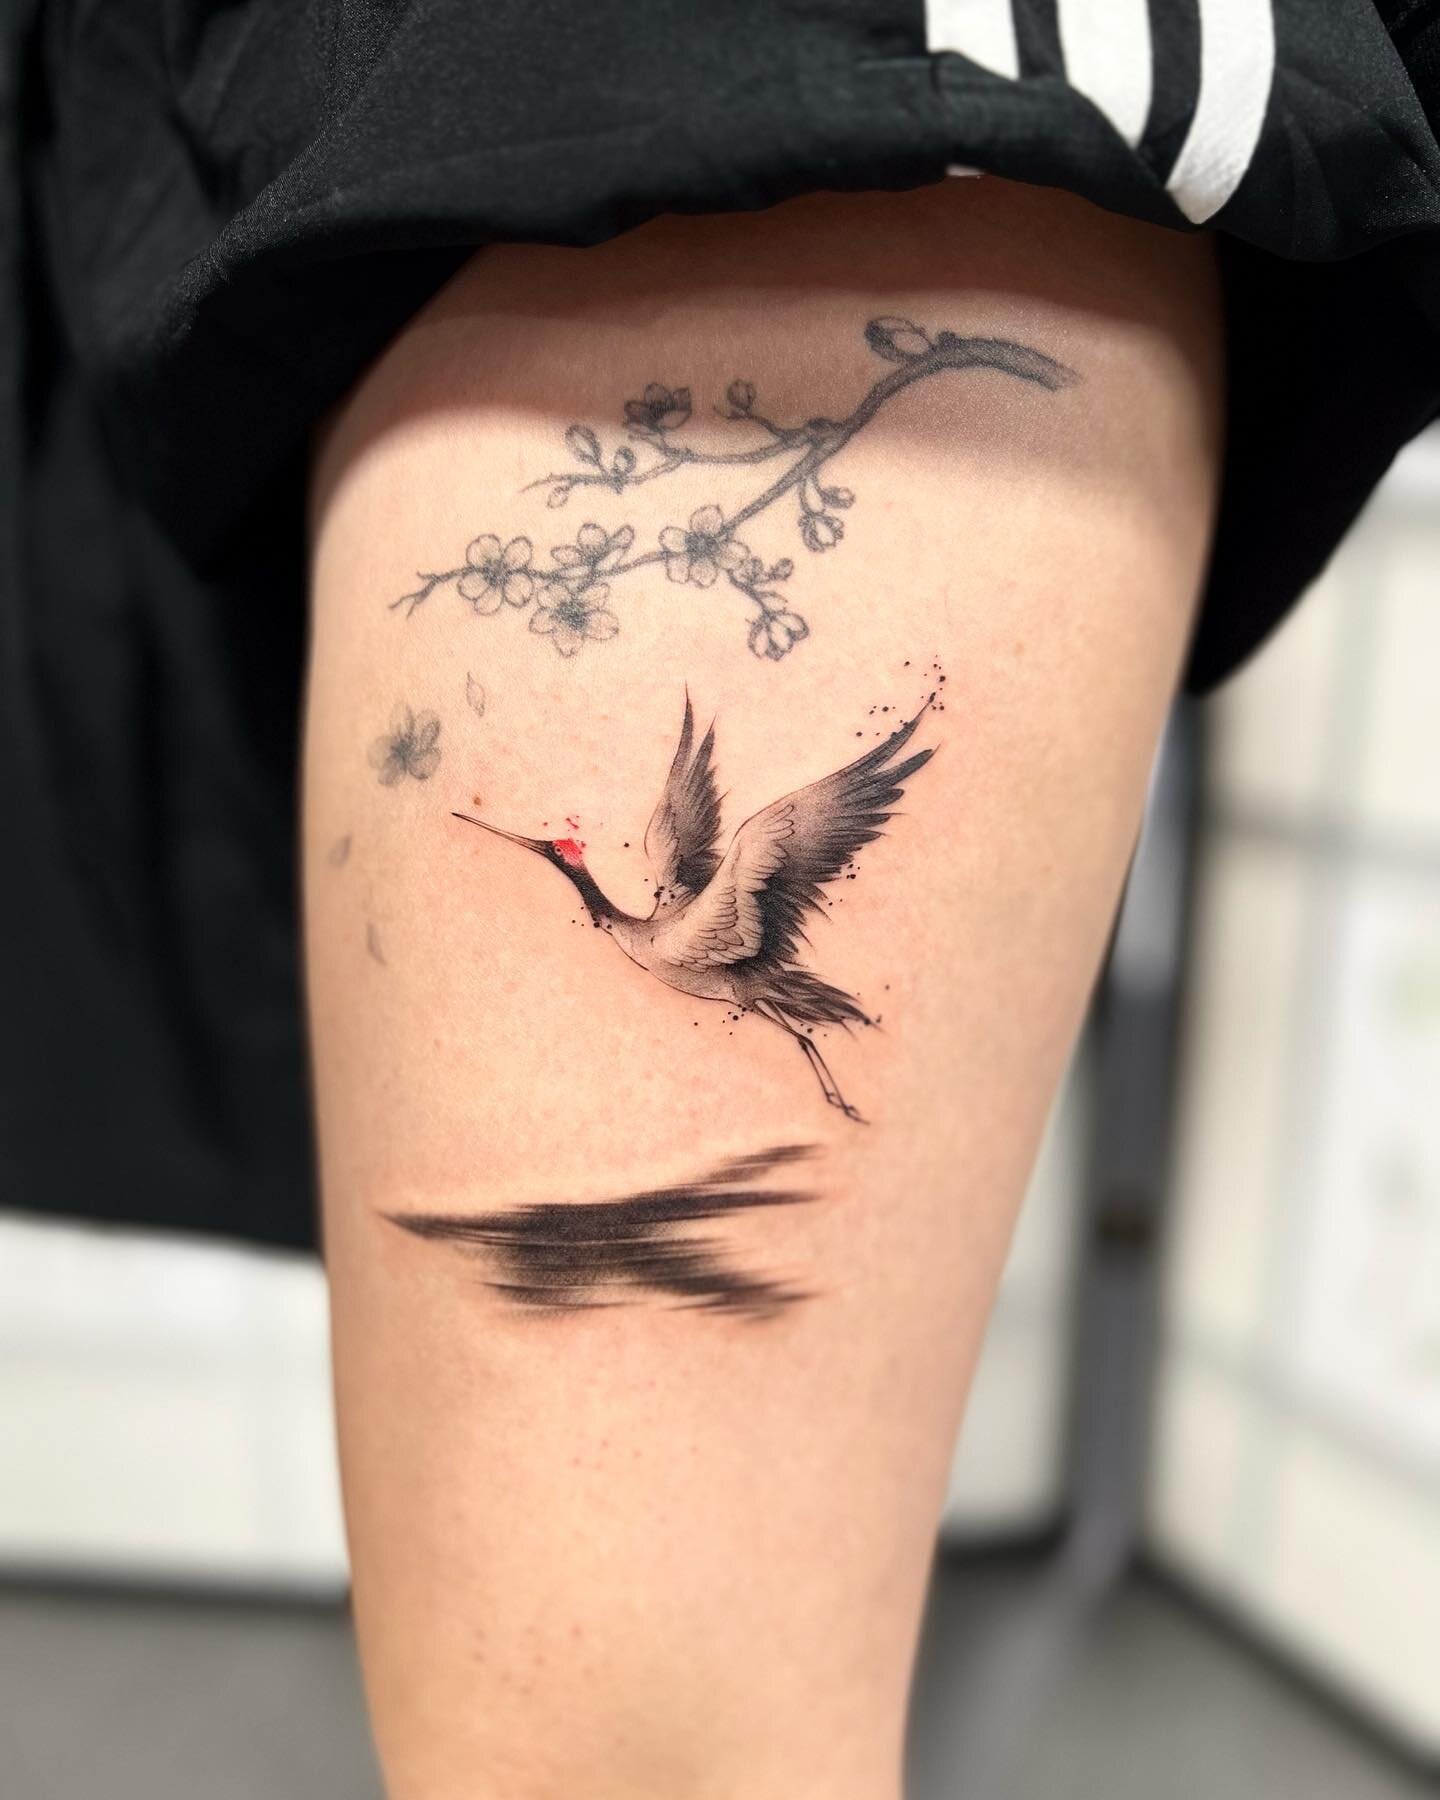 By @jingstattoo 
She has been having some crane inquiries recently, and she loves to do more!!! 

#cranetattoo #crane #fineline #brush #brushstyle #watercolor #brushtattoo #nyctattoo #nyctattooartist #femaletattooartist